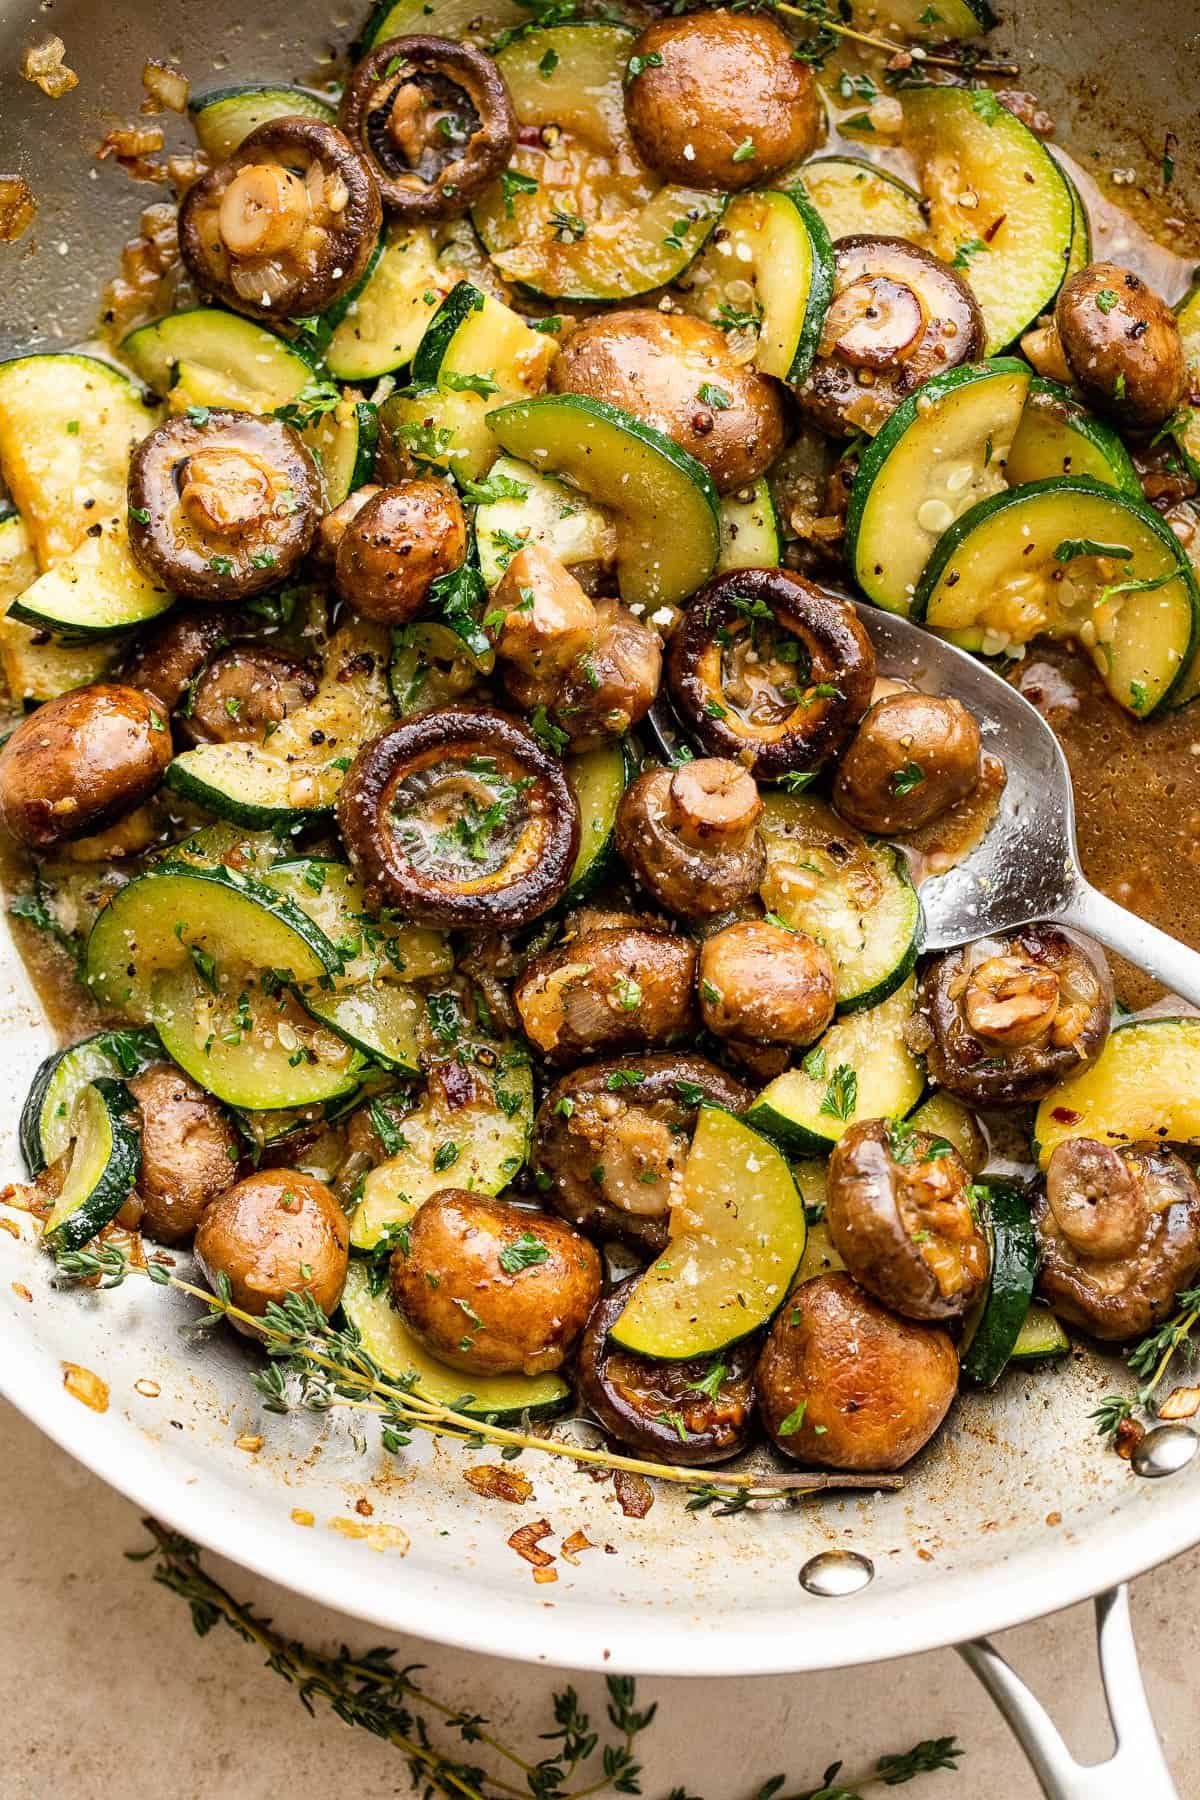 sliced zucchini and button mushrooms cooking in a stainless steel skillet